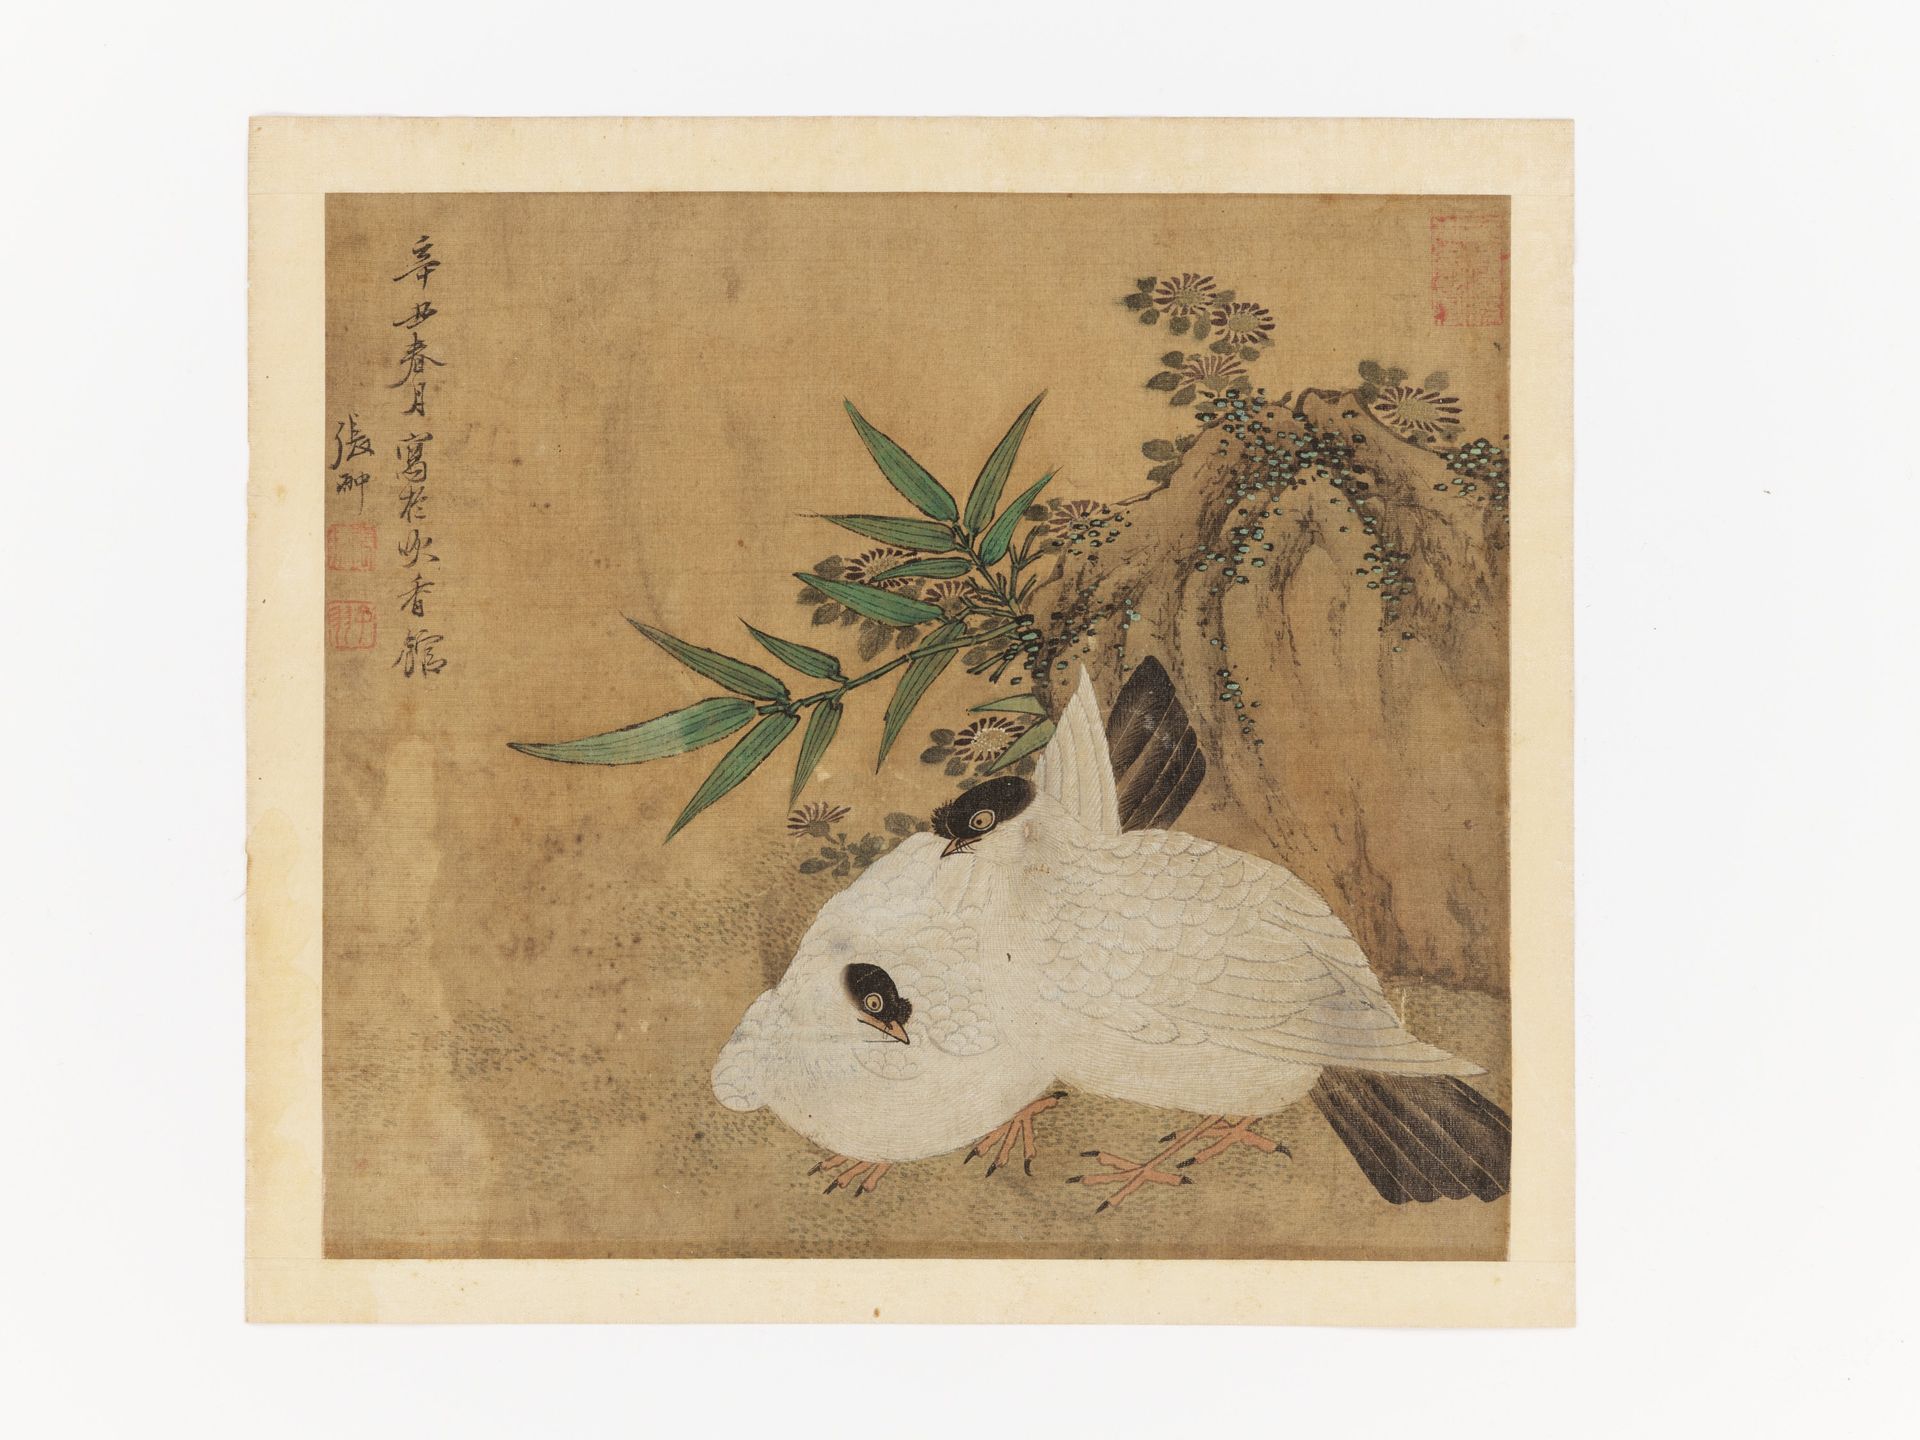 ‘PAIR OF DOVES’ BY ZHANG CHONG (c. 1628-1652) PAIRE DE COLOMBES DE ZHANG CHONG (&hellip;